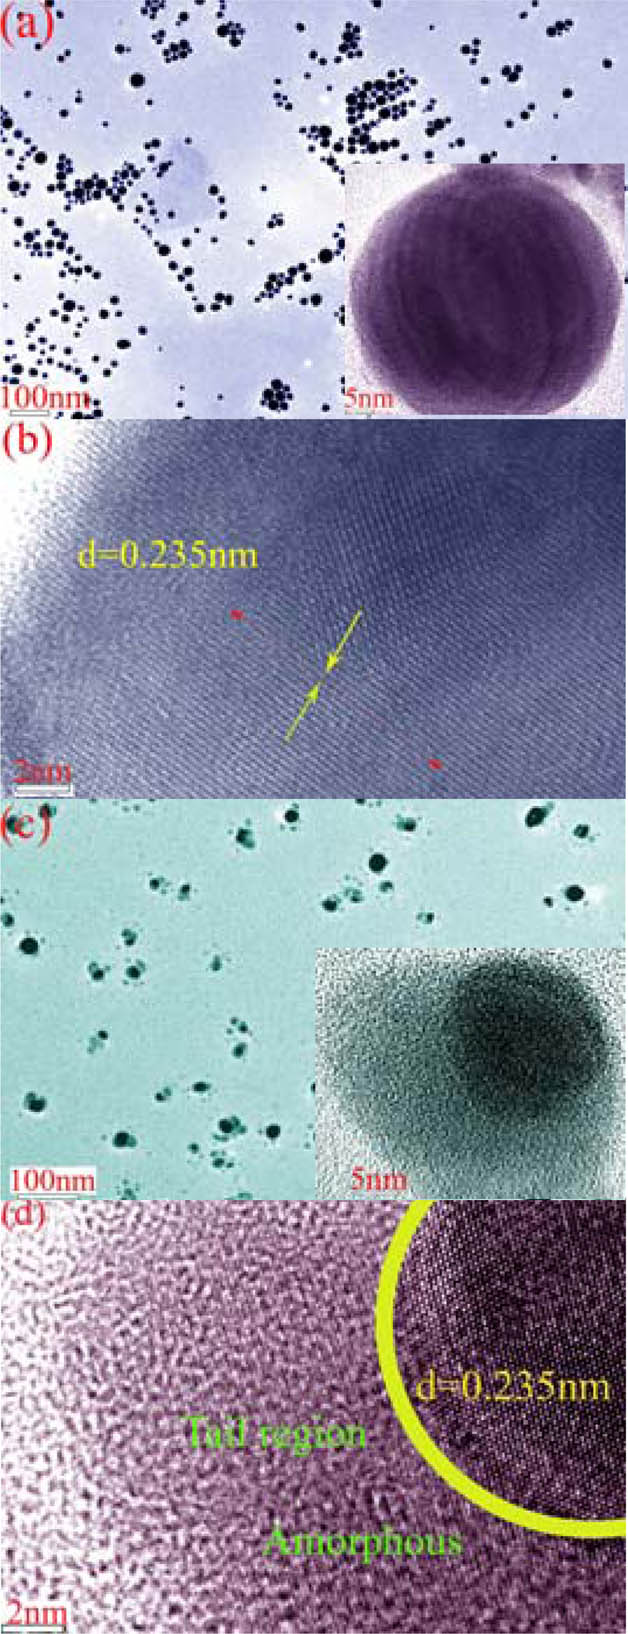 (a) Typical low magnification of the nano-particles by the laser ablation of the pure Au metal in the solution. The inset shows the enlarged TEM image of the individual Au nano-spheres. (b) The HRTEM image of the Au nano-spheres. (c) The representative low-magnification TEM image of the Au nano-particles fabricated by unfocused laser beam irradiation of Au nano-spheres with a power density of 1.5 GW/cm2. The inset in panel (c) shows the typical tadpole-shaped Au NMs. (d) The HRTEM image of the tadpole-shaped Au NMs.